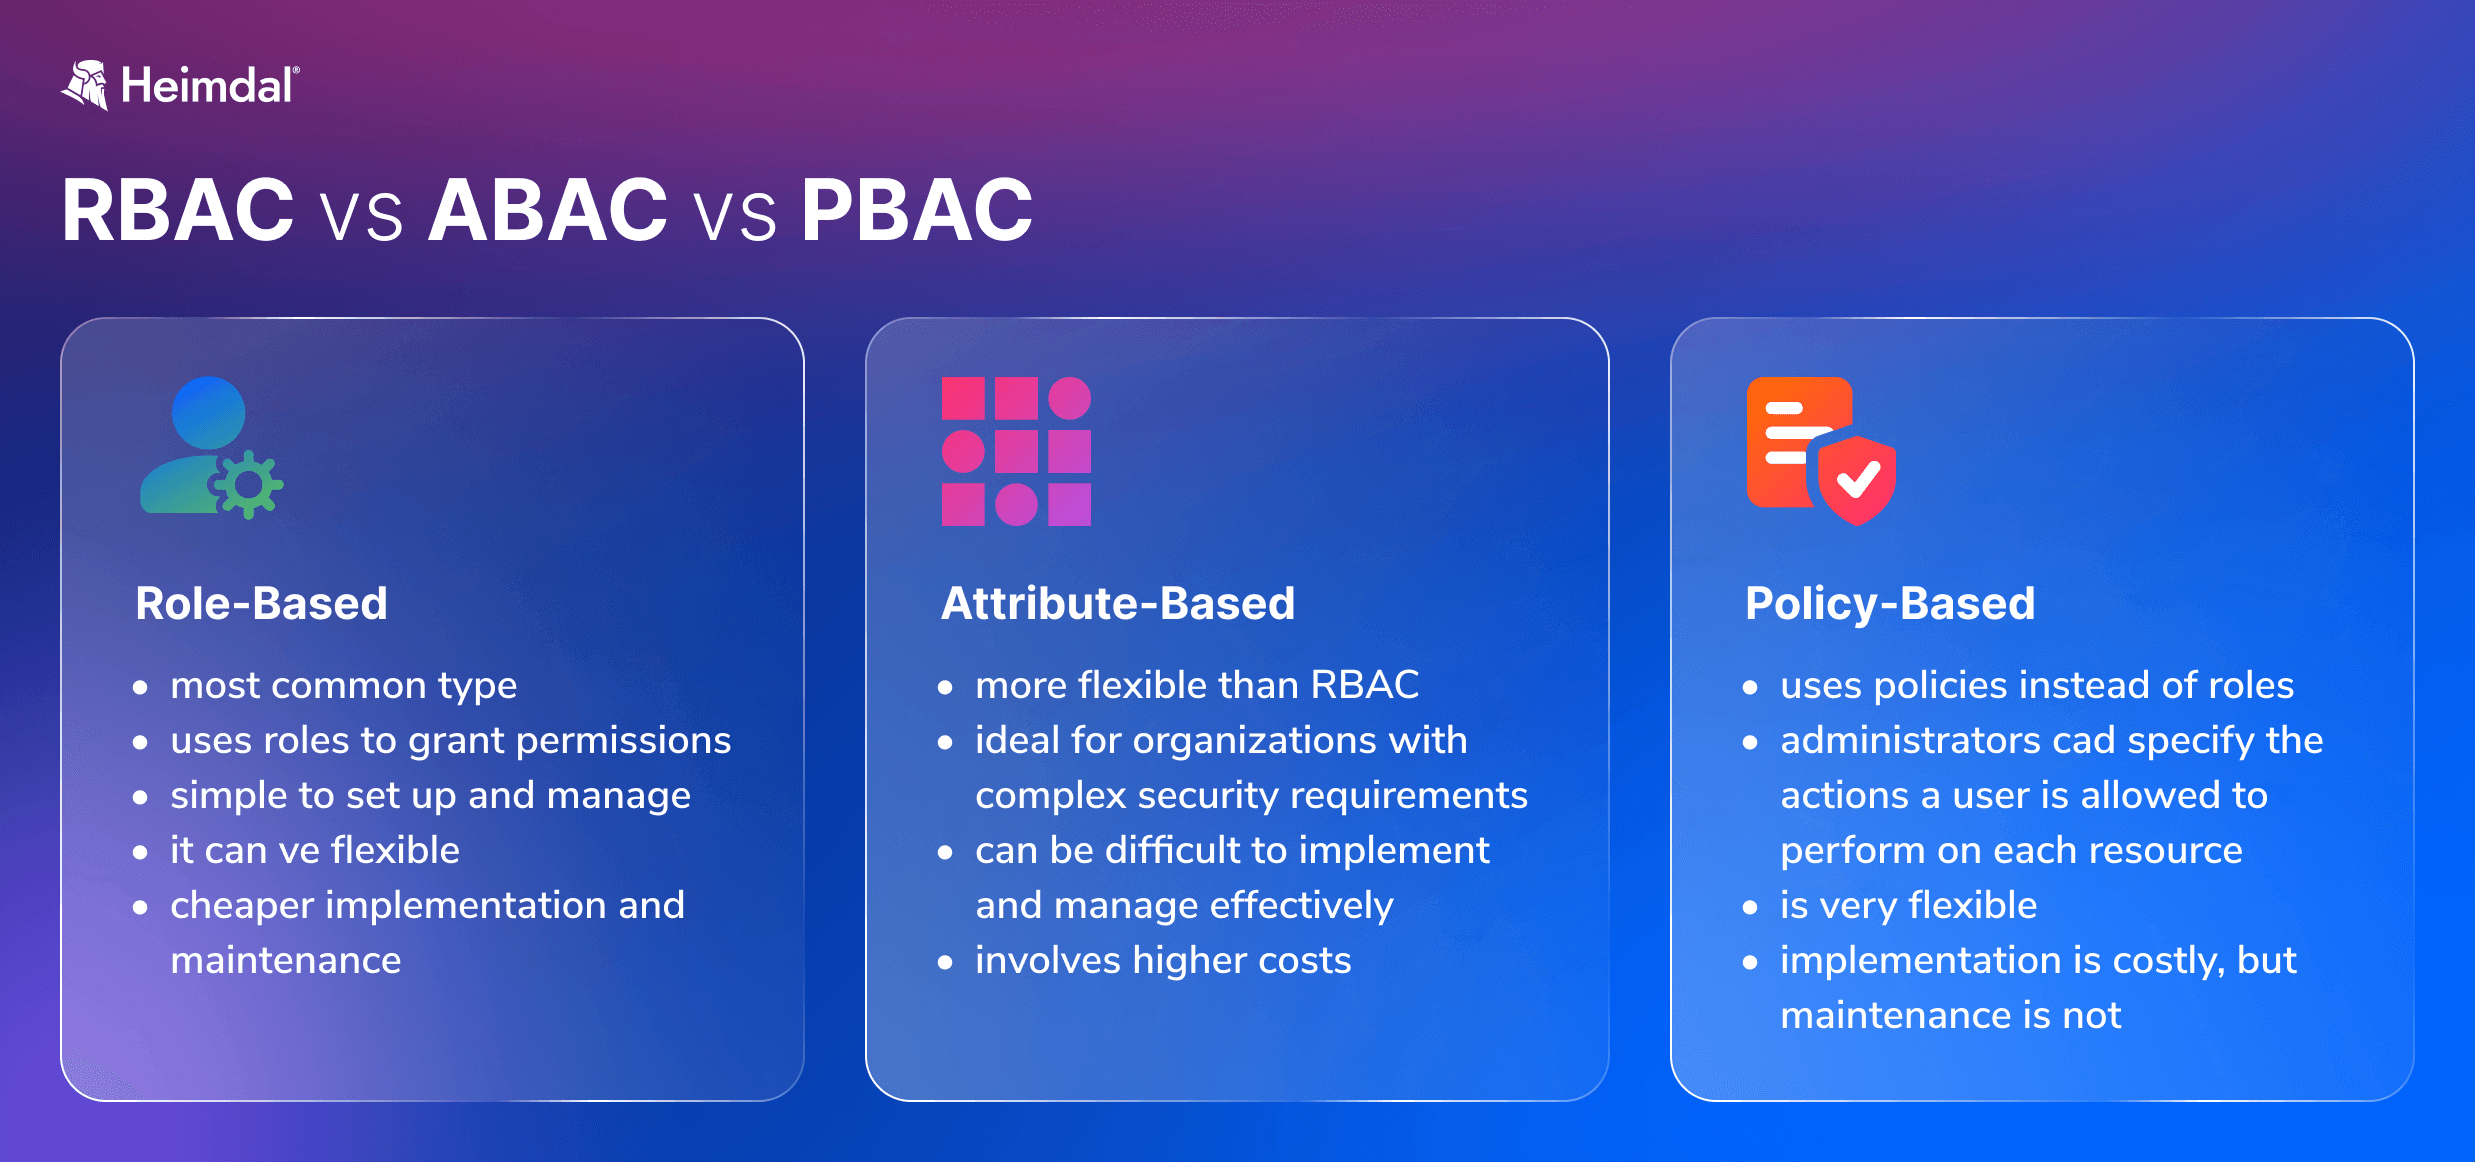 A comparison between three access control systems: RBAC, ABAC, and PBAC